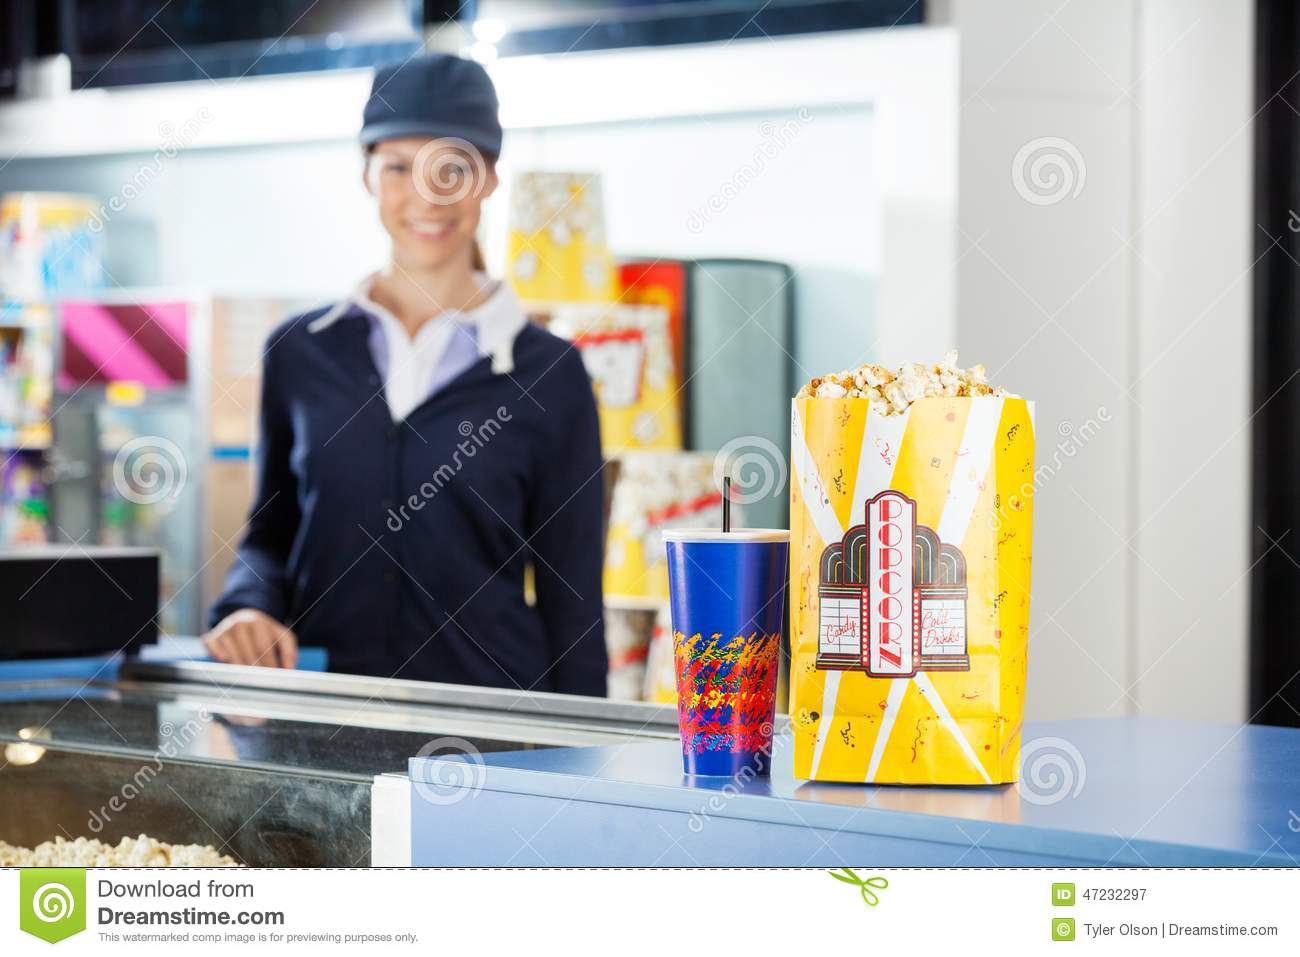 Concession Stand At Cinema With Female Worker Standing In Background